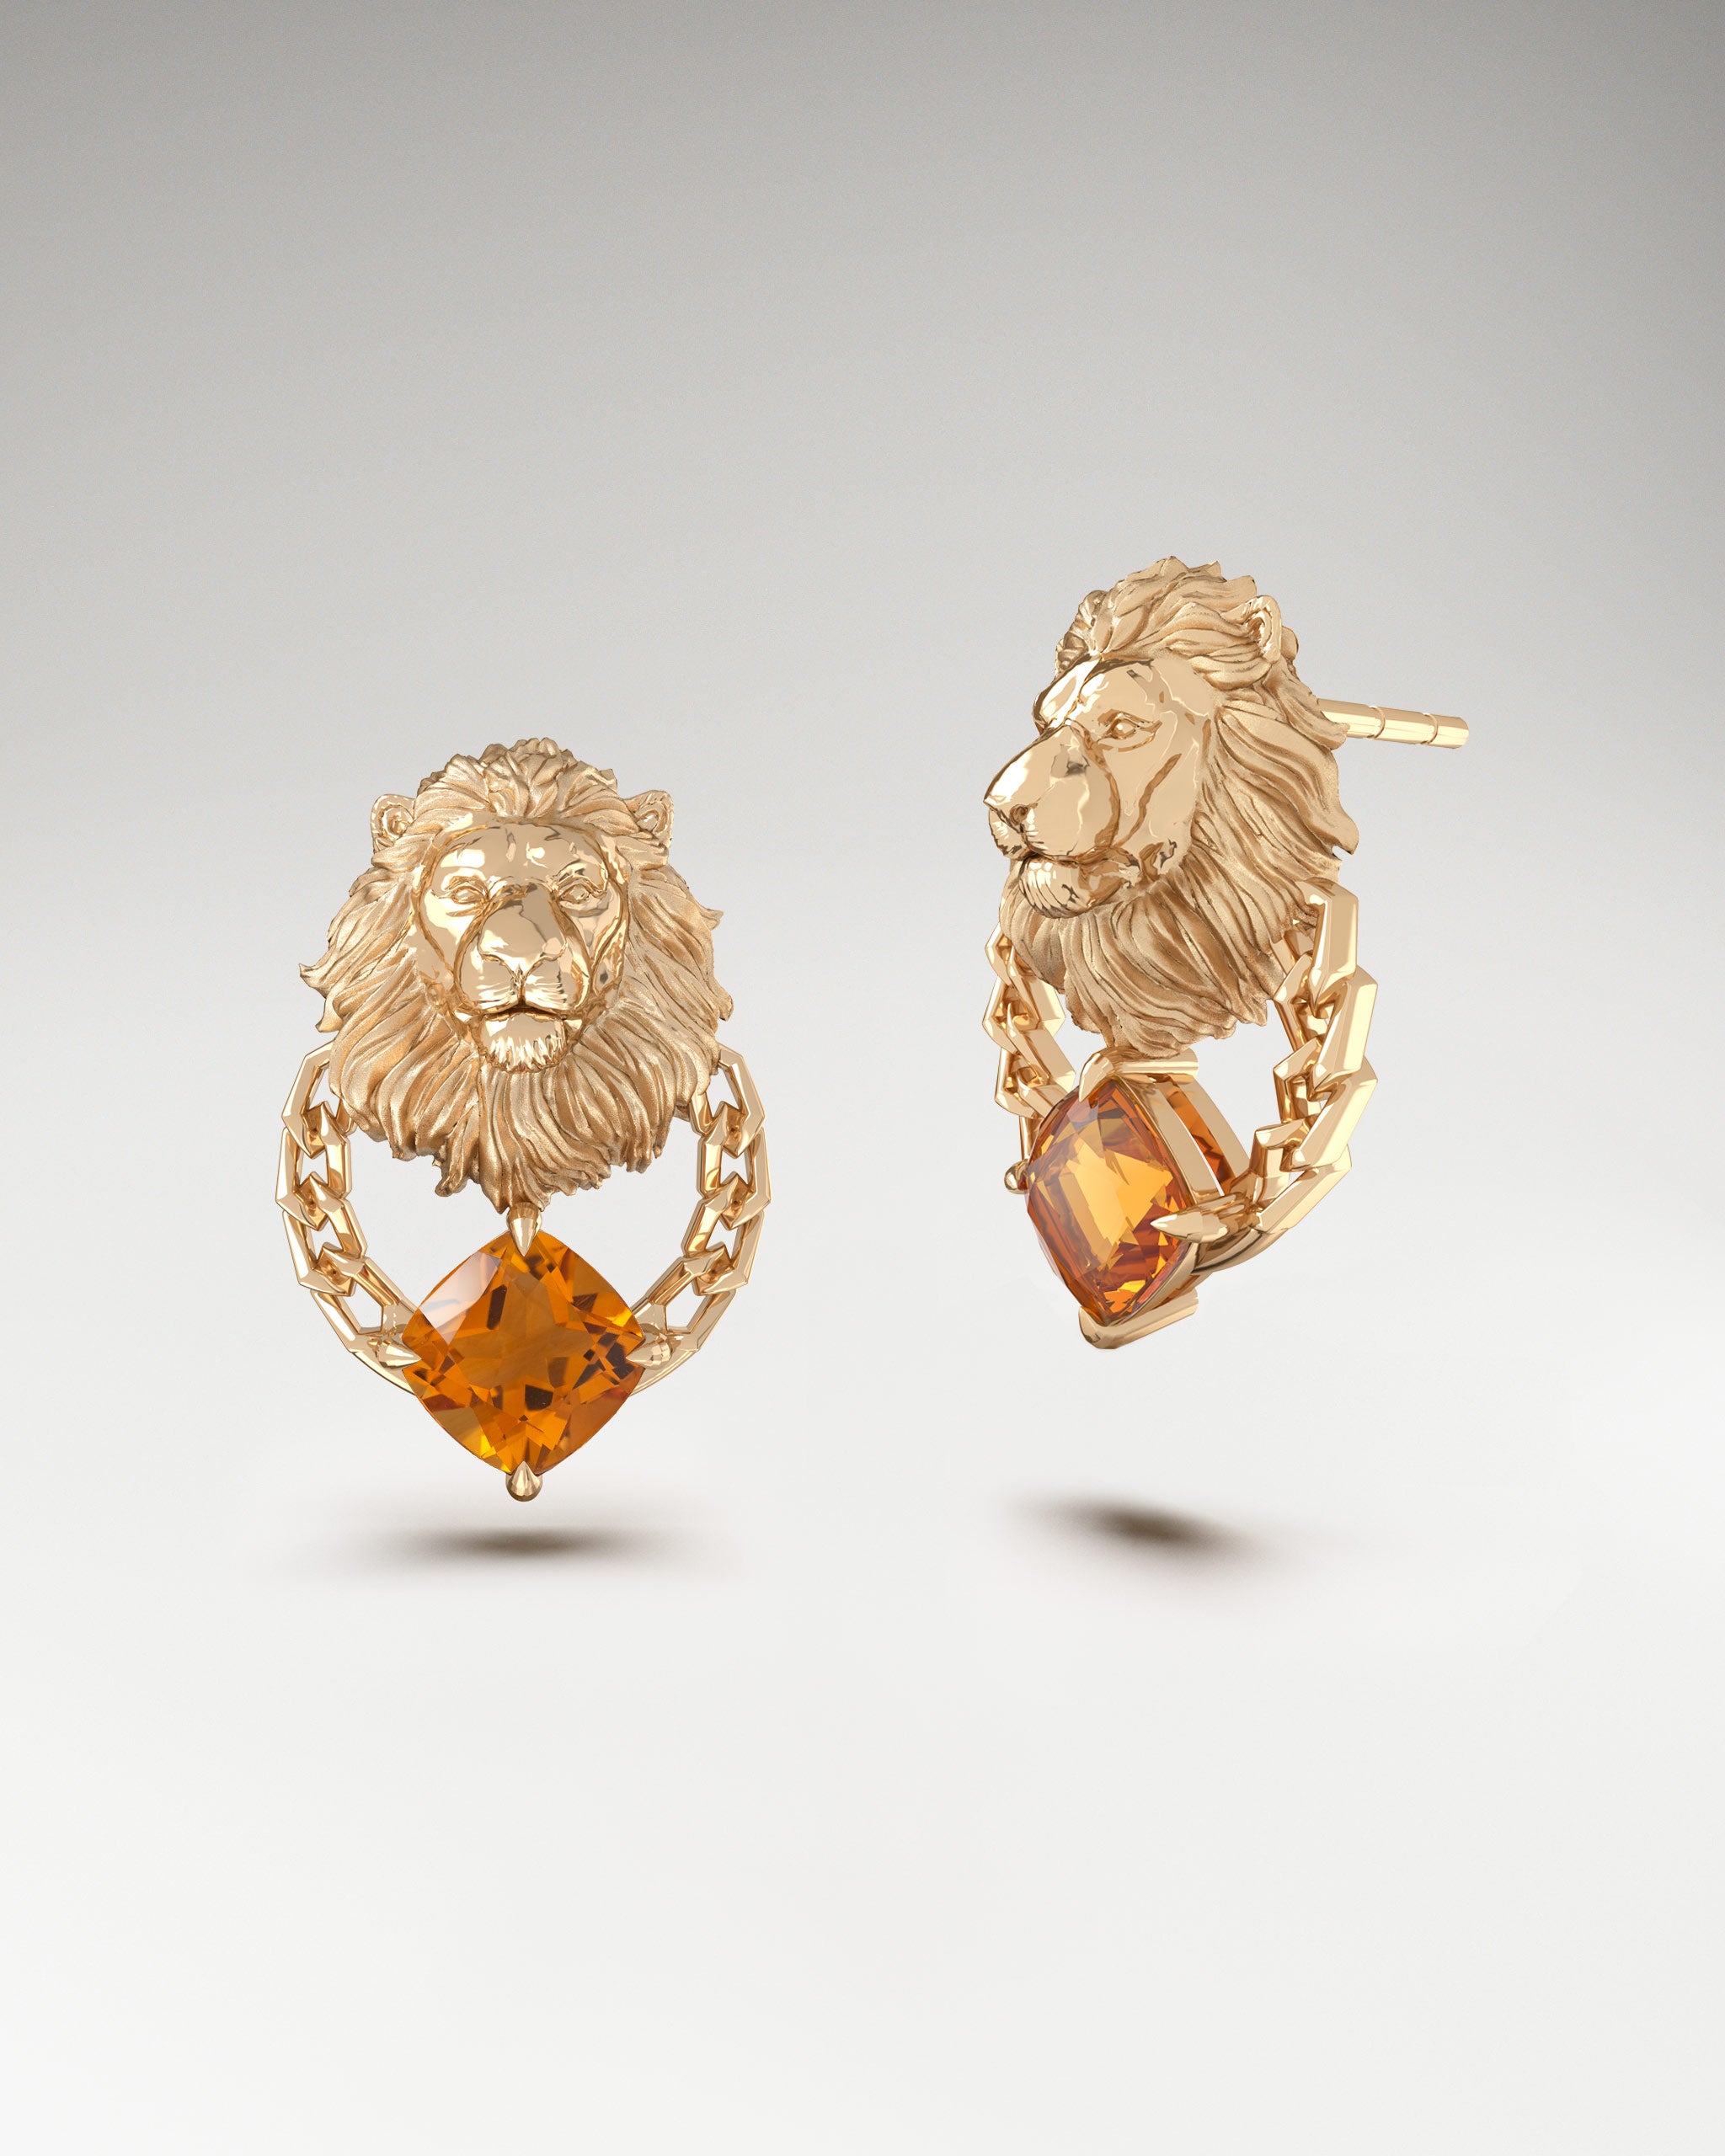 Lion sculpture stud earrings with gold and citrine